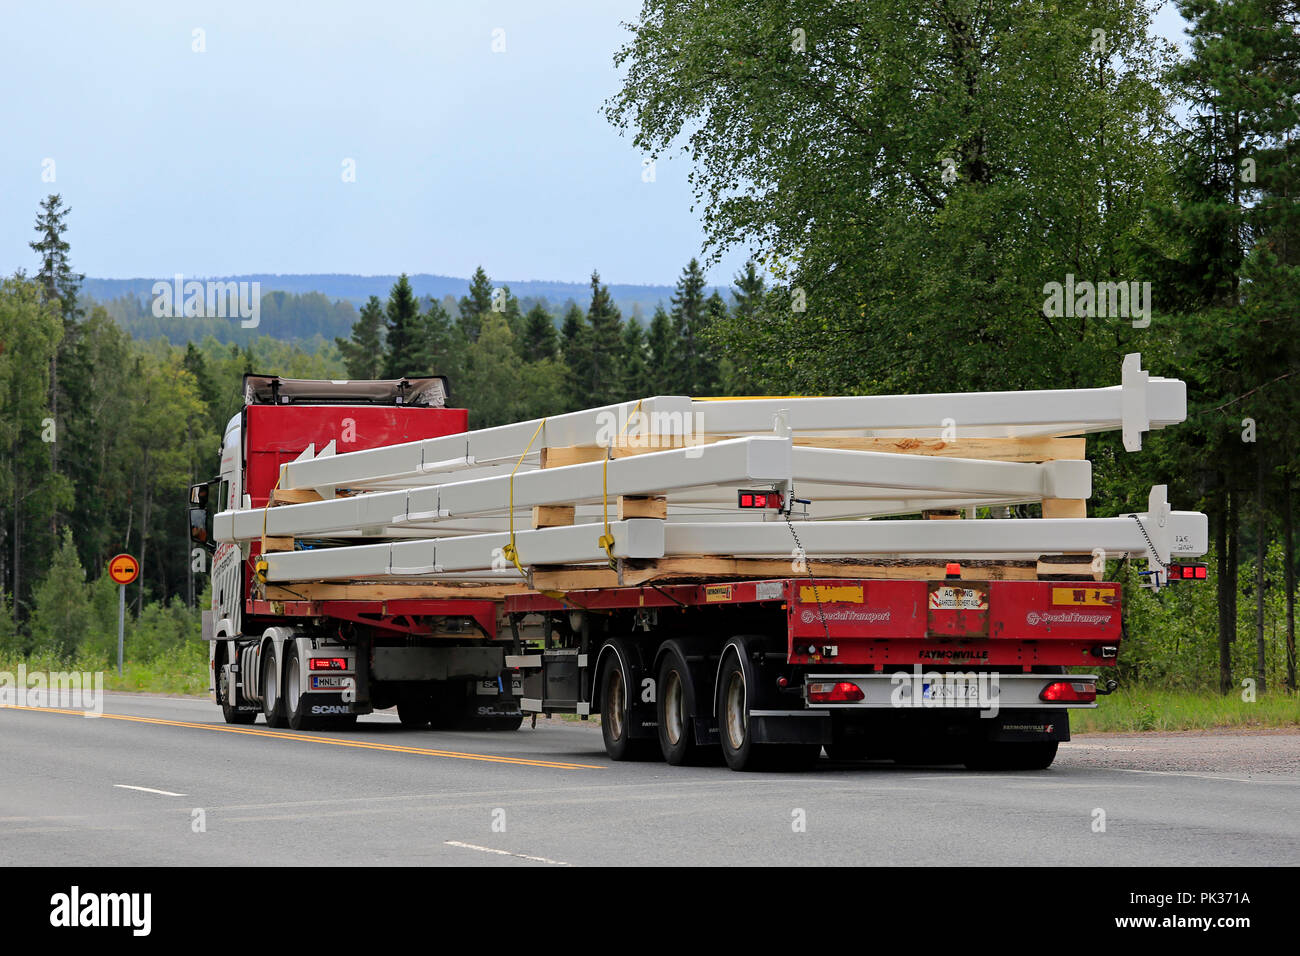 Scania R500 truck of Ismo Partanen for AT Special Transport hauls oversize industrial object on road, rear view. Ikaalinen, Finland - August 9, 2018. Stock Photo